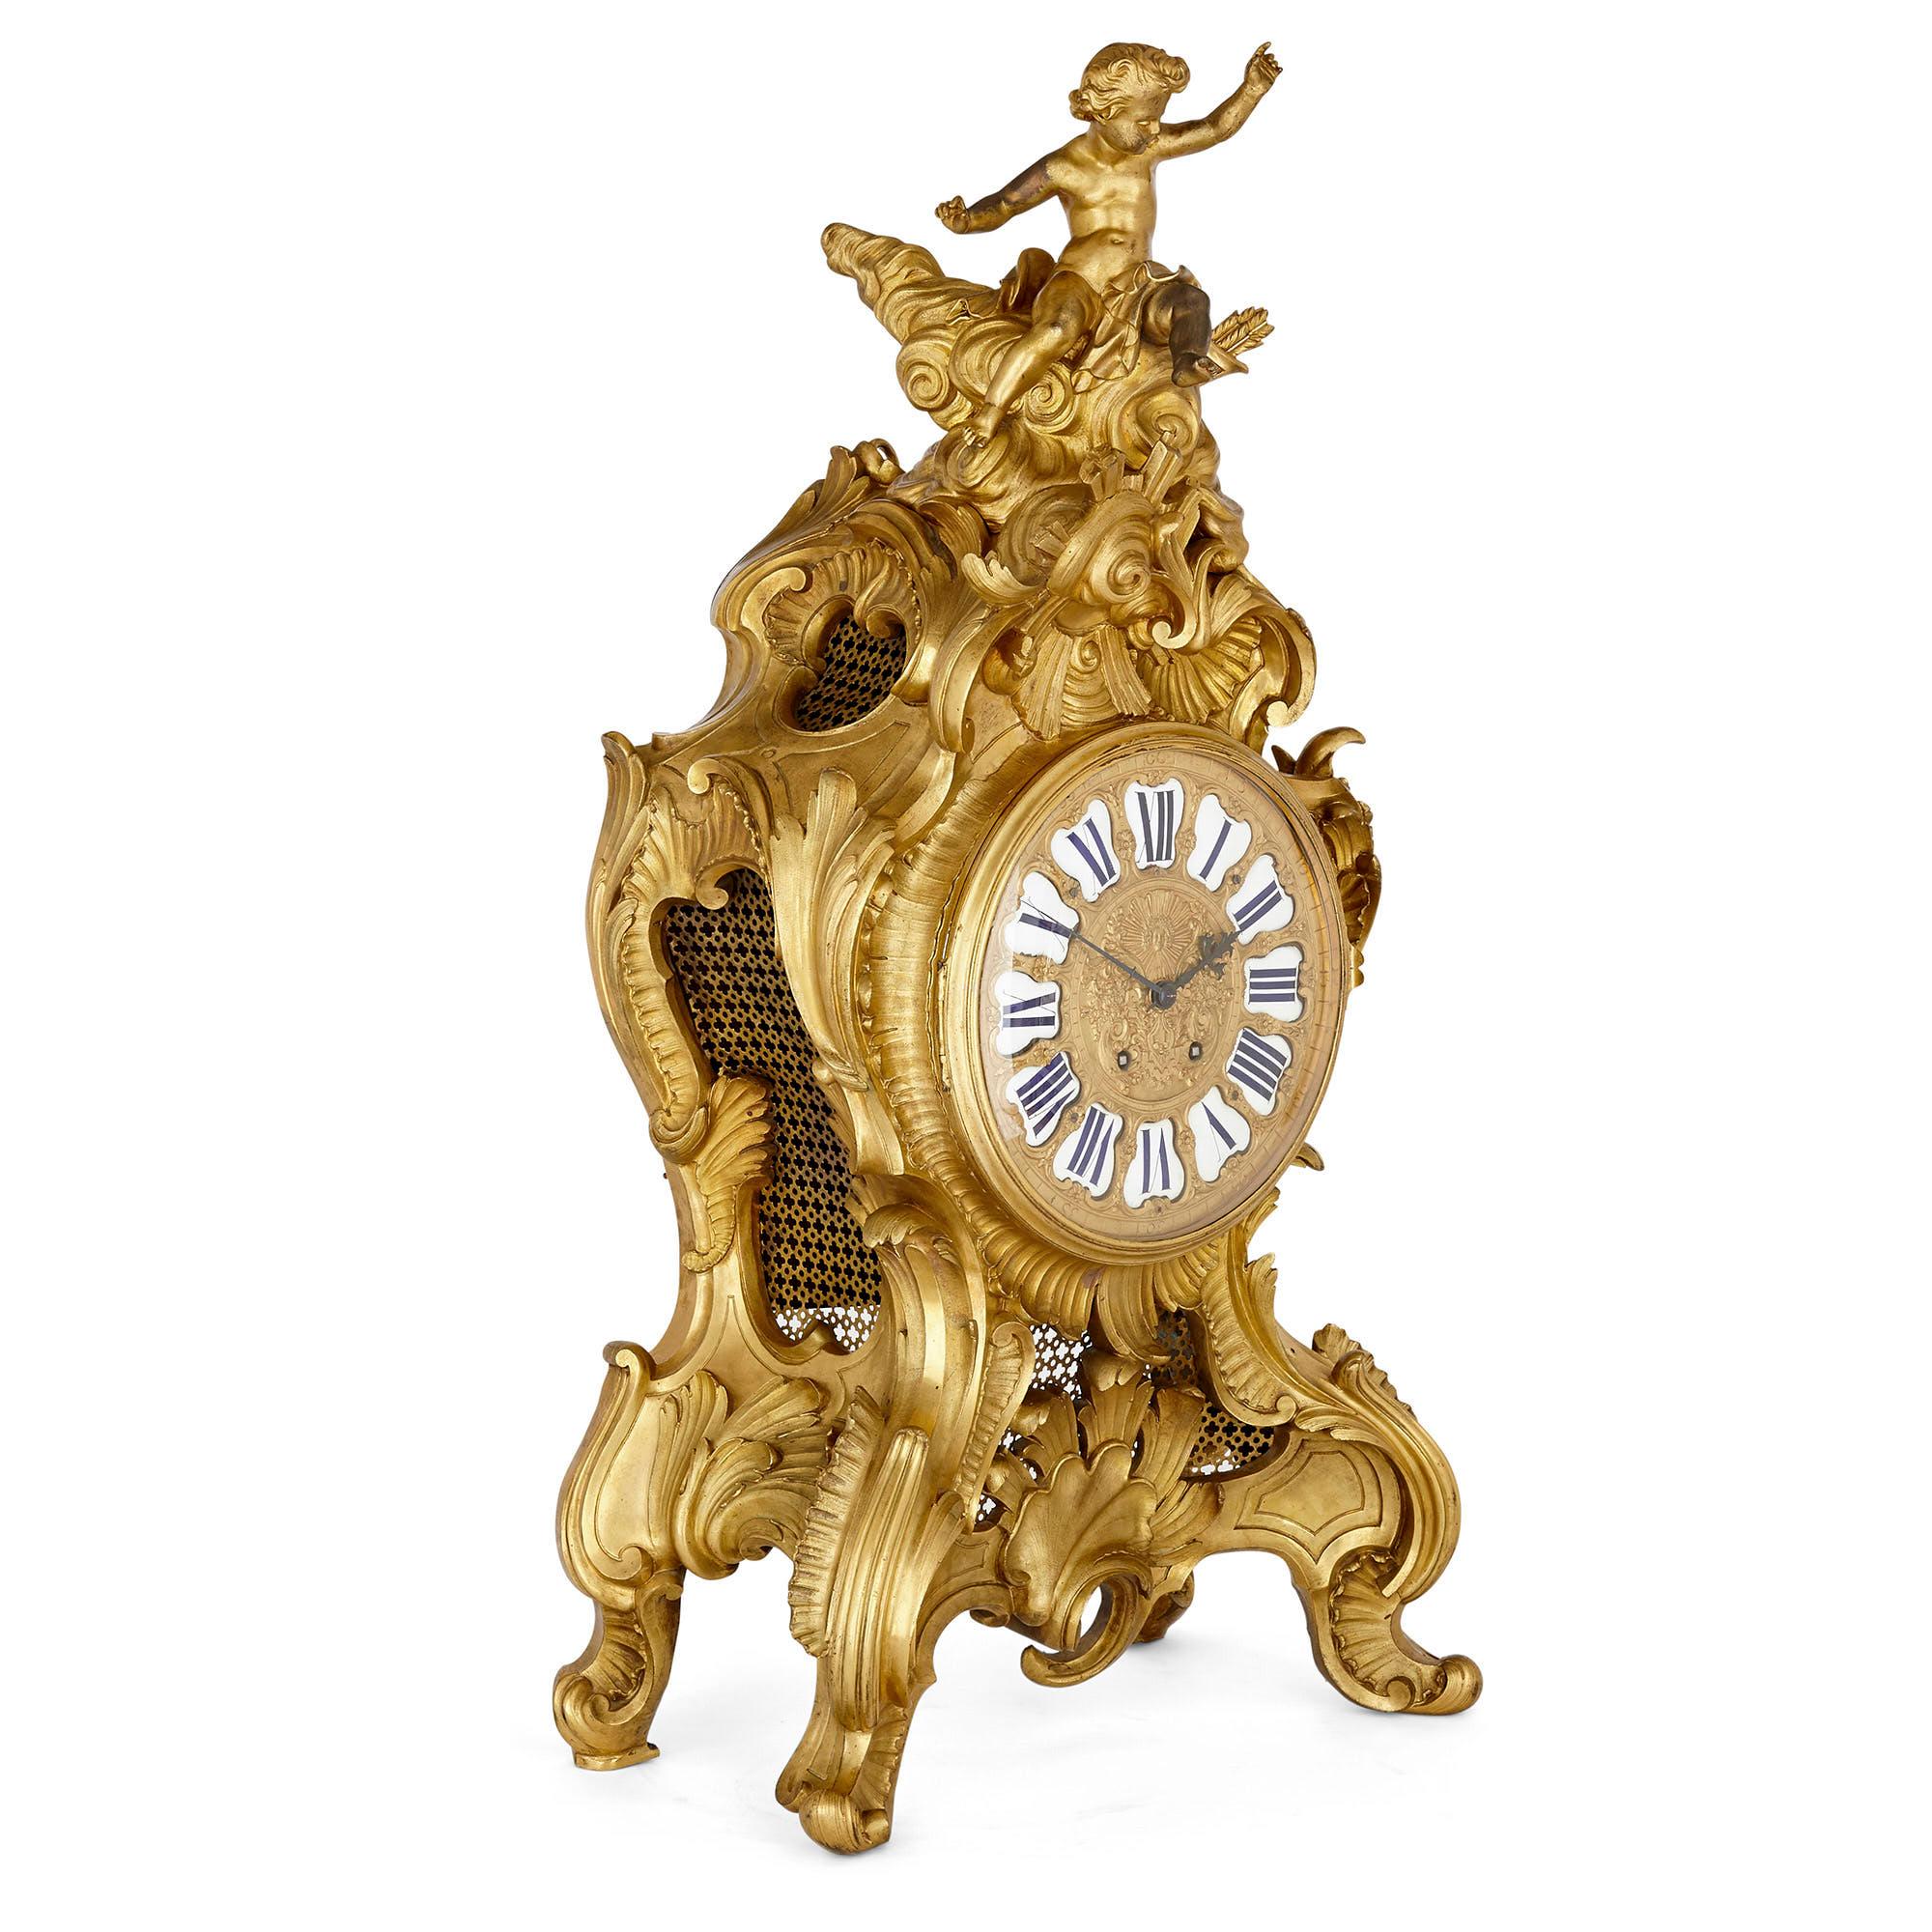 Very large French Louis XV style ormolu mantel clock
French, circa 1880
Measures: Height 98cm, width 50cm, depth 27cm

This fine 19th century clock is unusually large, standing at 98cm in height, giving a uniquely palatial feel and a true sense